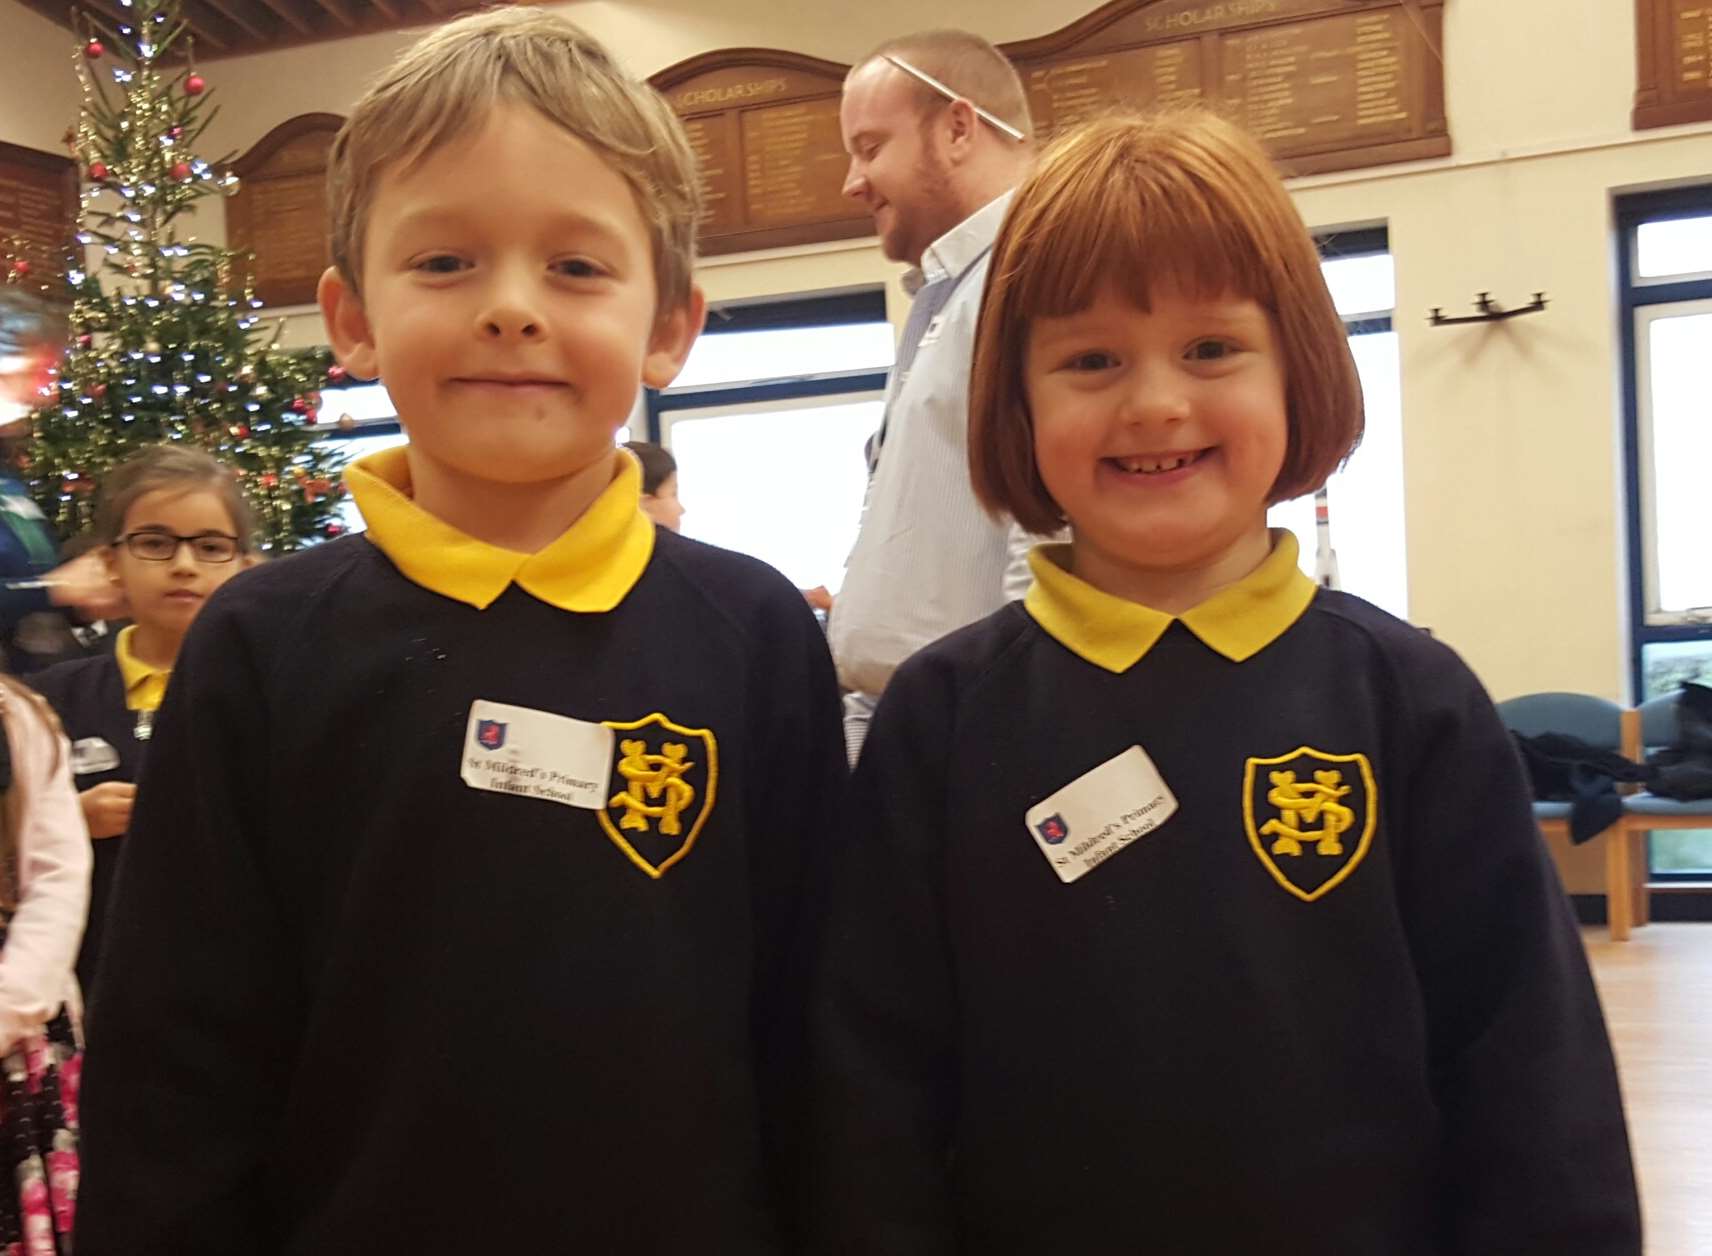 St Mildred's Primary School pupils Max Spurgin, seven, and Grace Cooper, six, were excited to see Tim Peake launch into space.